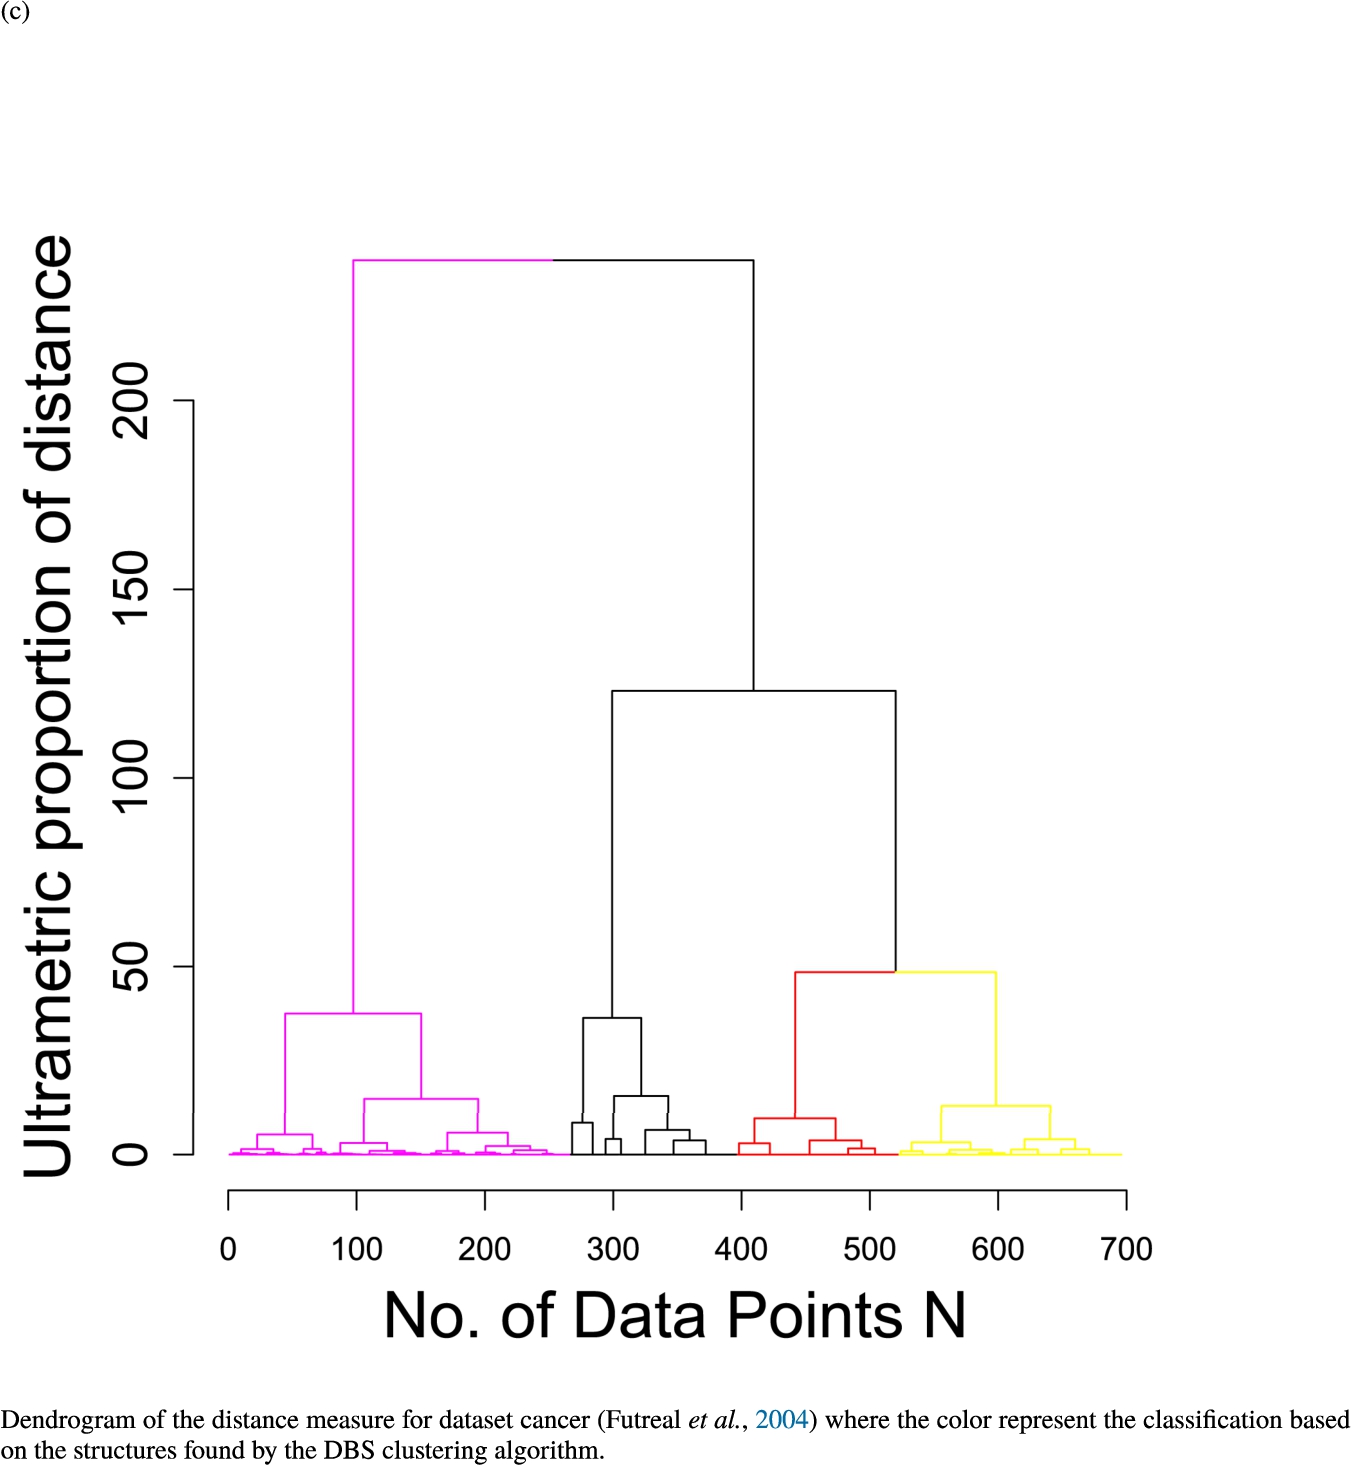 Dendrogram of the distance measure for the four use case datasets. The dendrogram visualizes the ultrametric property of the distance measure, which is able to represent proximity and hierarchical structures of high-dimensional data (Murtagh, 2004). In the dendrogram, close datapoints or clusters of datapoints are connected with each other creating a connection between two points on the x axis with small height on the y axis. The further away two datapoints or clusters of datapoints are, the higher is the height of the built connection represented on the y axis.